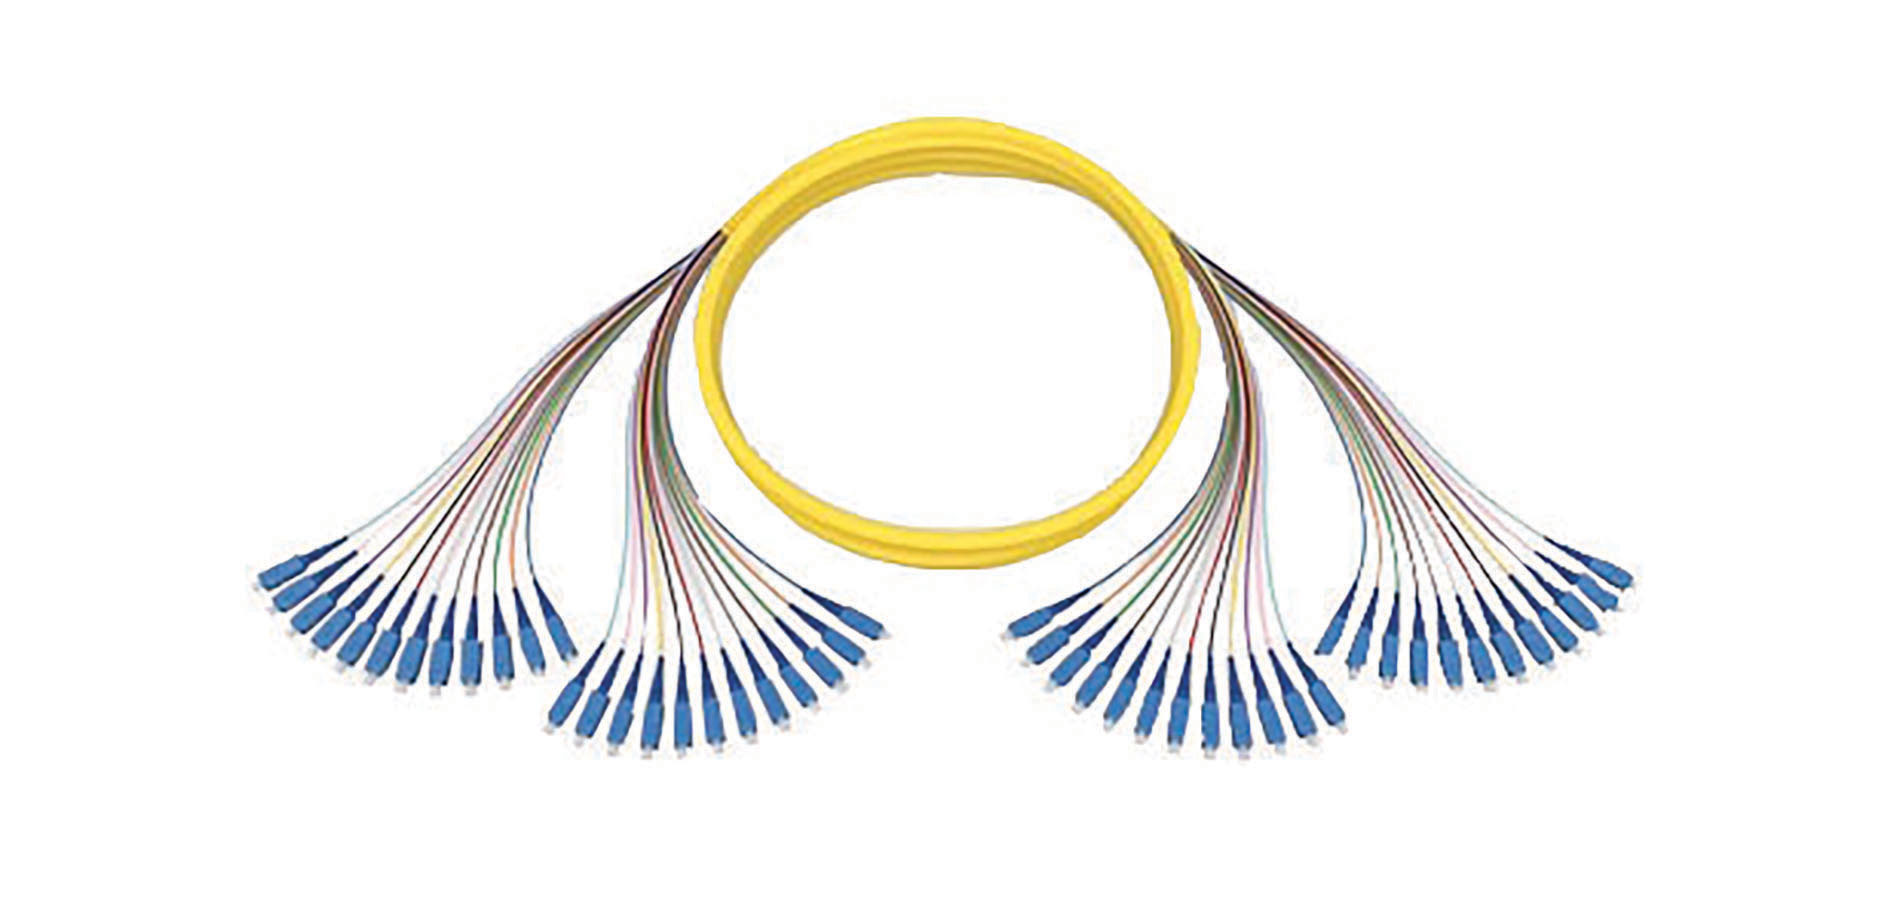 Blue and yellow fiber optic cables. Image by Corning.